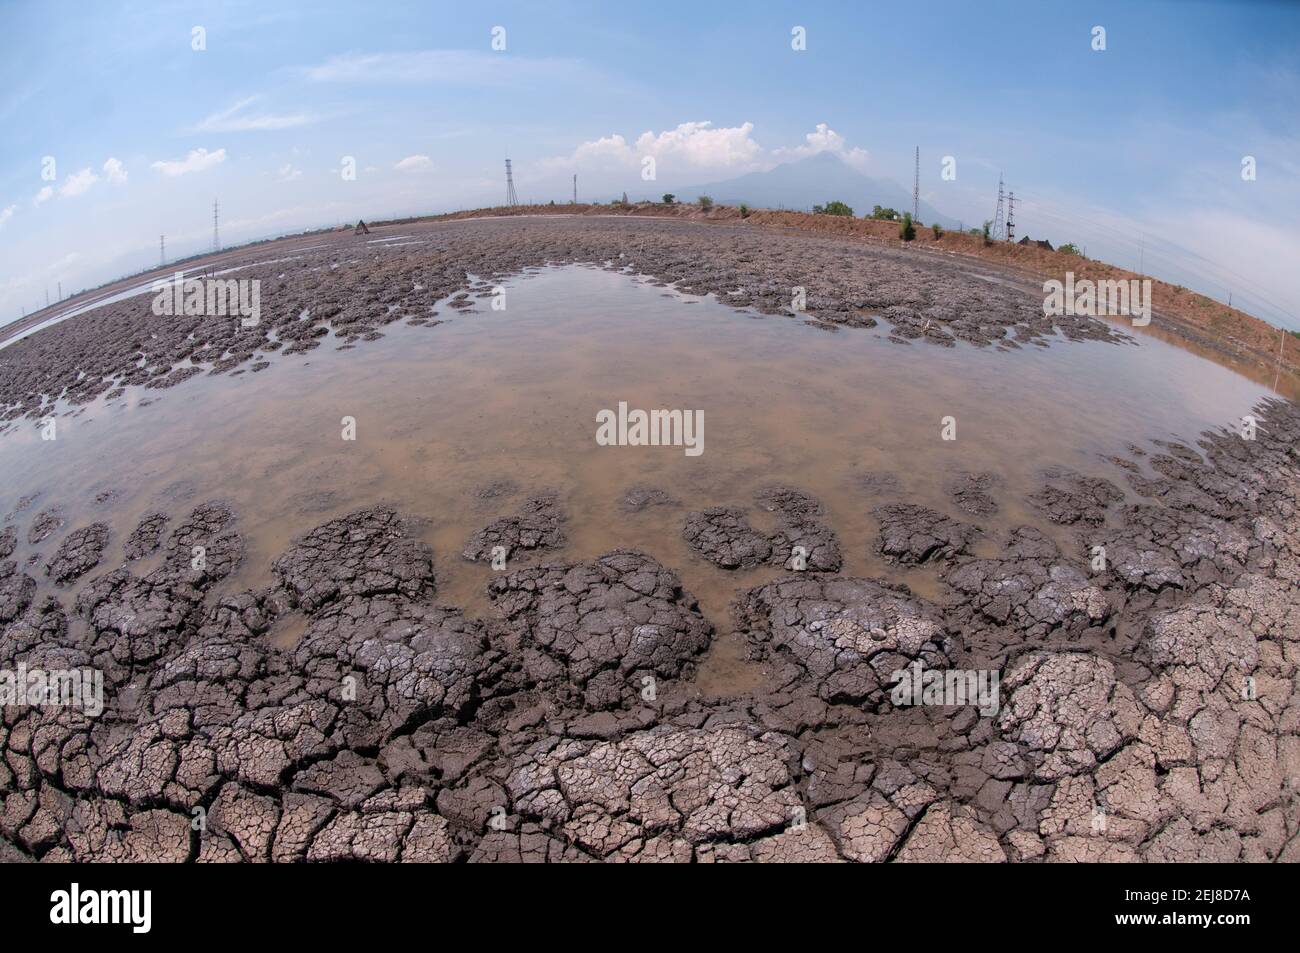 Dried mud in mud lake environmental disaster and volcano which developed after drilling incident, Porong Sidoarjo, near Surabaya, East Java, Indonesia Stock Photo